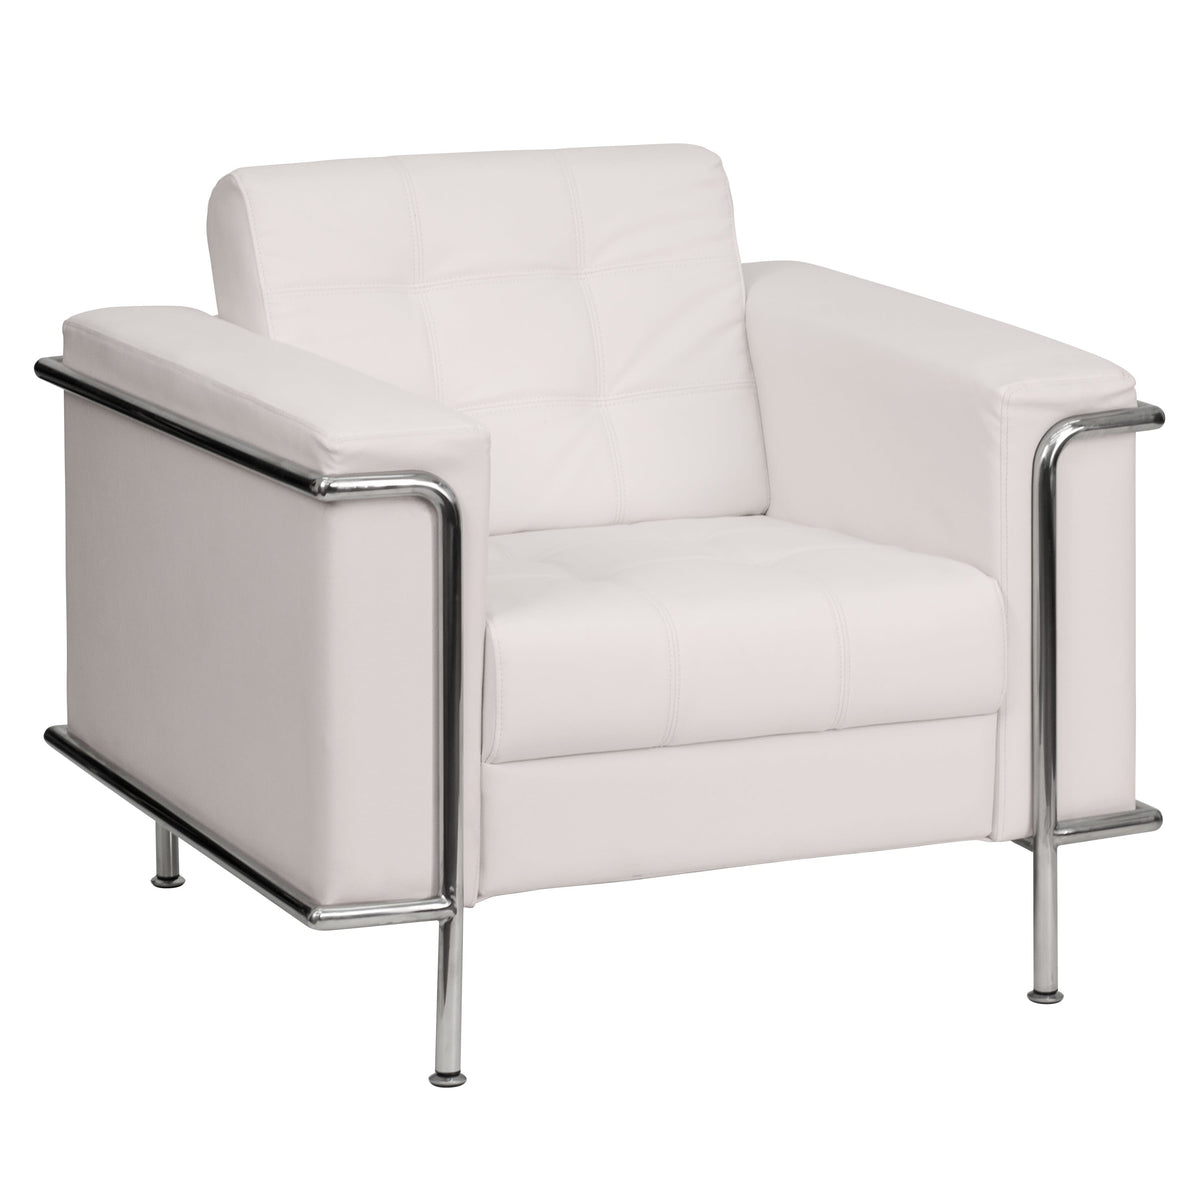 Melrose White |#| Contemporary White LeatherSoft Double Stitch Detail Chair w/Encasing Frame